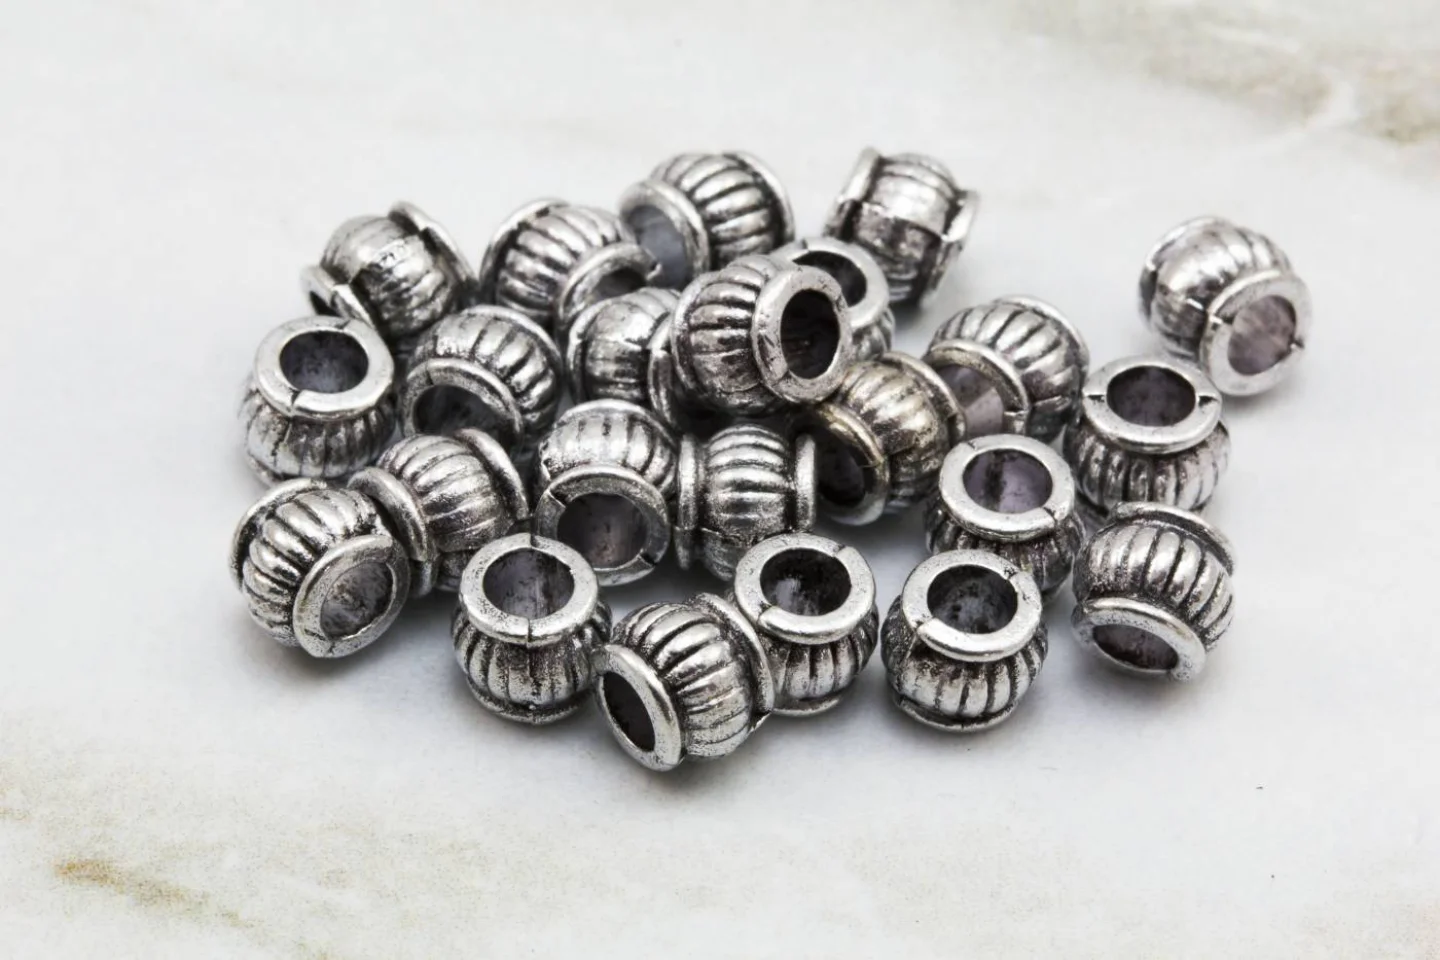 6mm-small-metal-jewelry-spacer-findings.